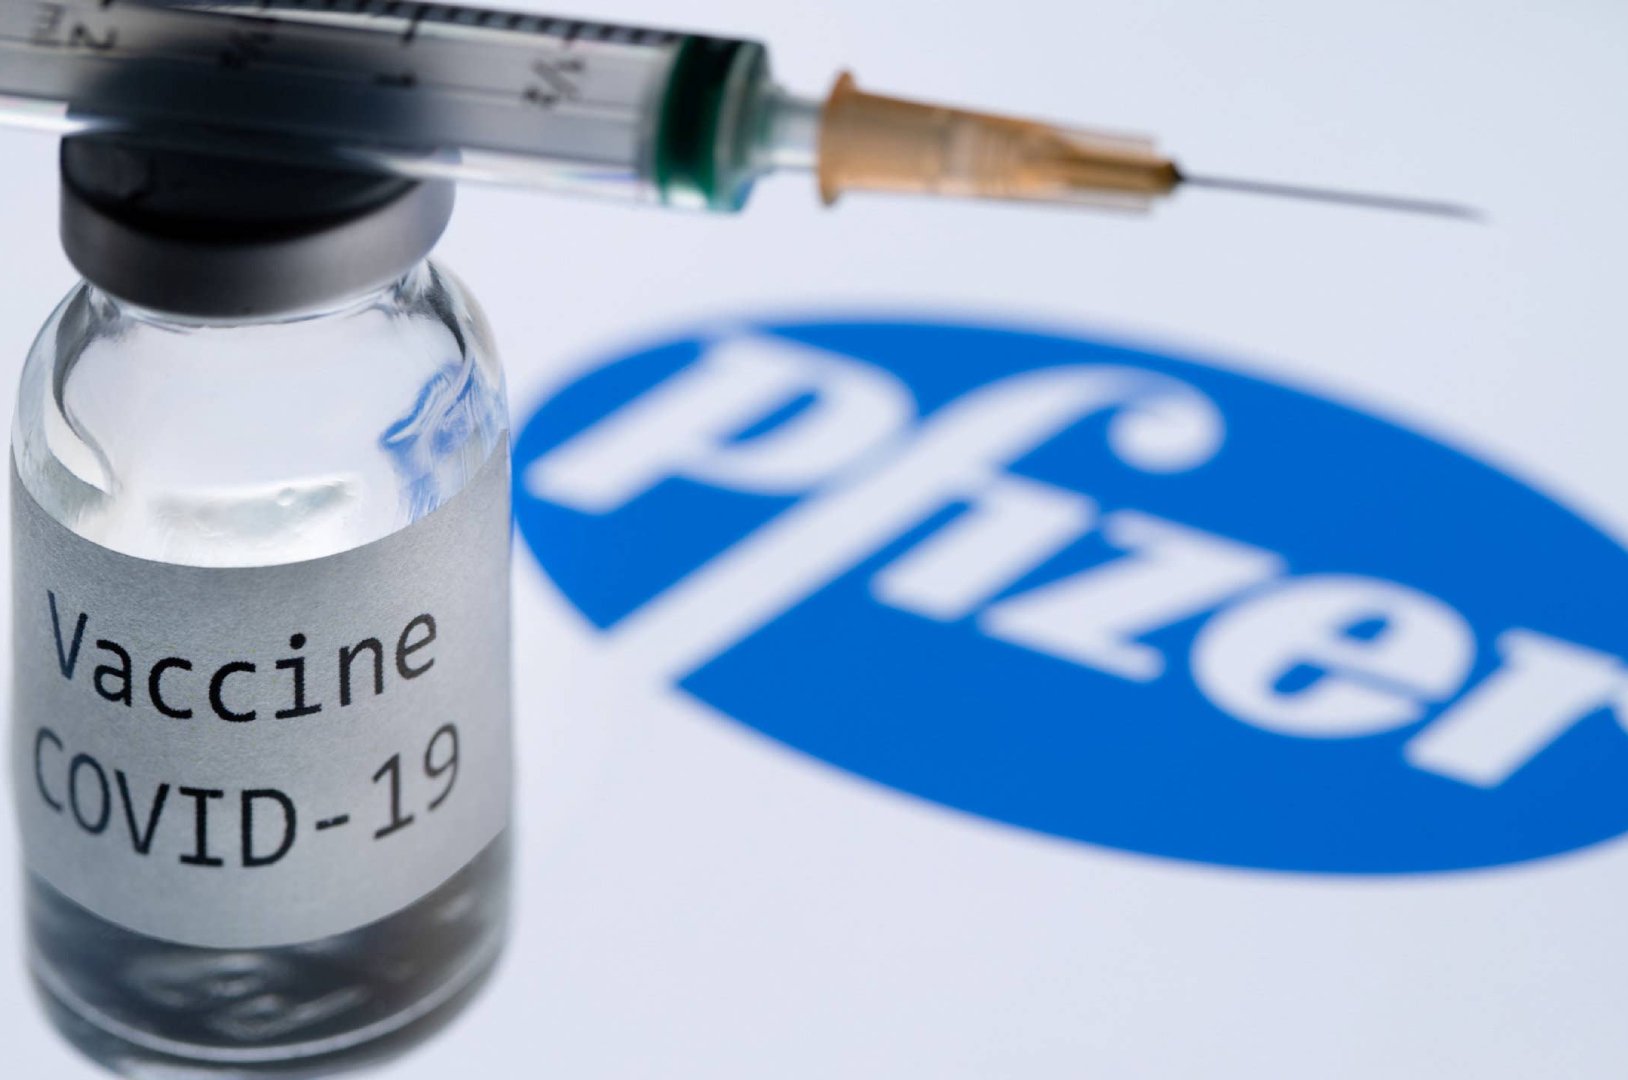 Severe Allergic Reaction In US Health Worker After Pfizer Vaccine Shot